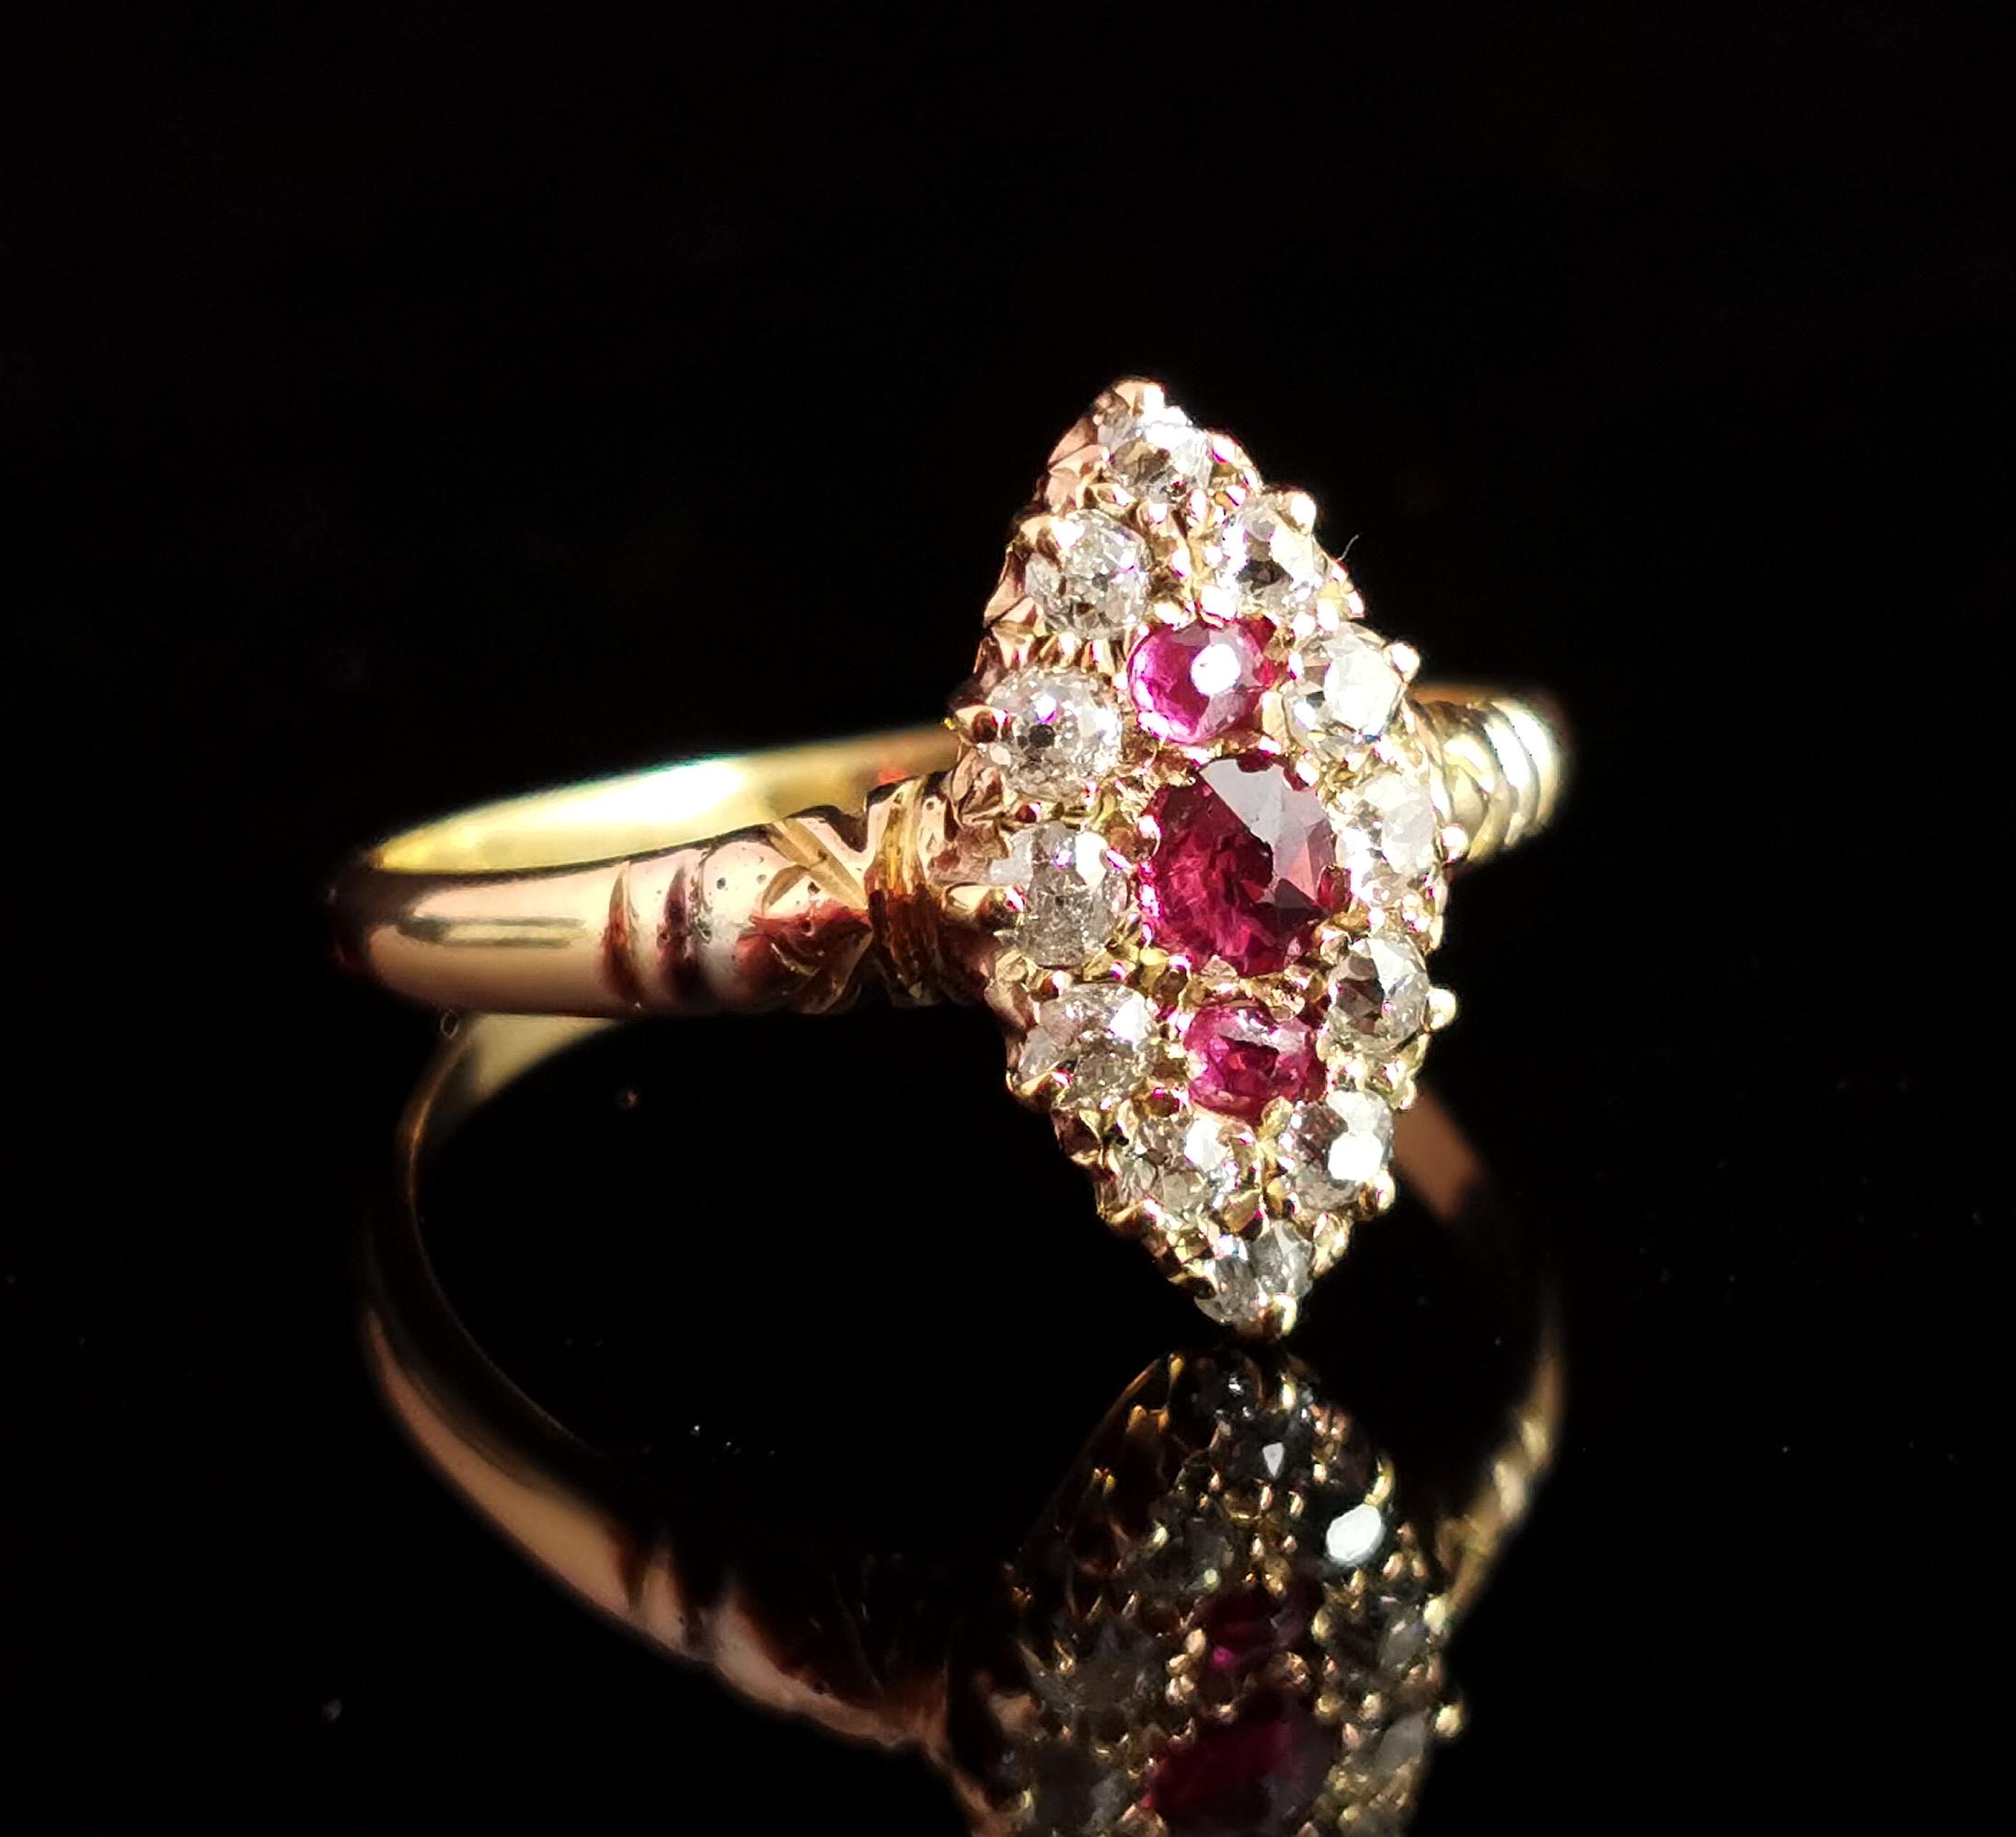 An impeccable antique, late Victorian era Ruby and Diamond navette ring.

This stunner features a central navette shaped panel with three pinky Rubies, the largest to the centre surrounded by a sparkling halo of twelve old cut diamonds.

The